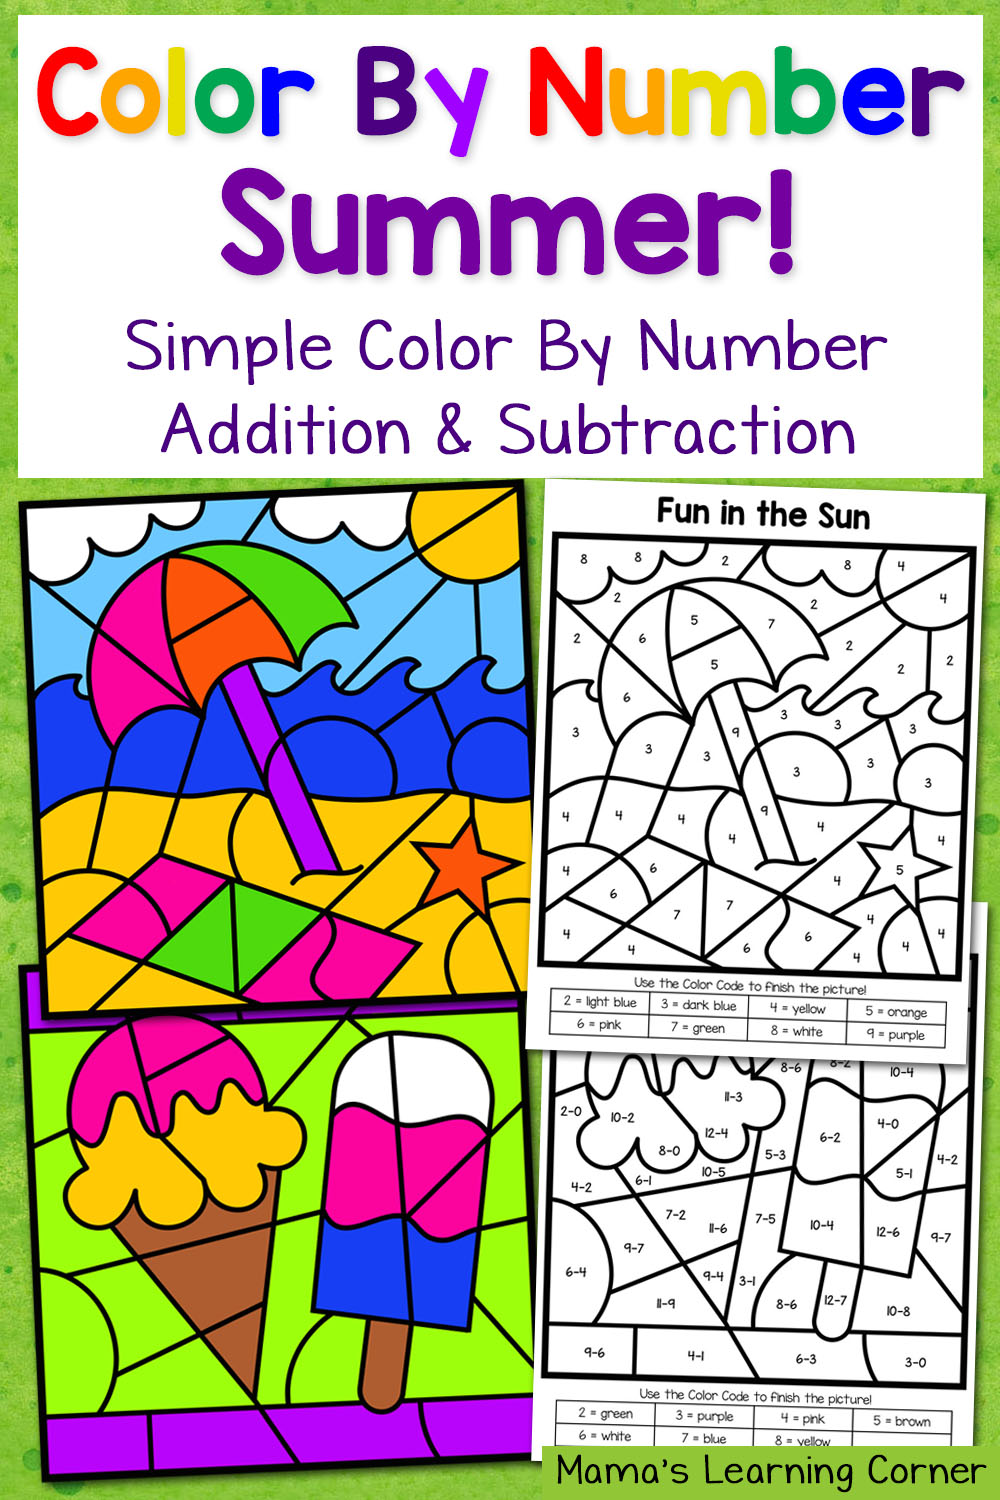 summer-color-by-number-worksheets-with-simple-numbers-plus-addition-and-subtraction-mamas